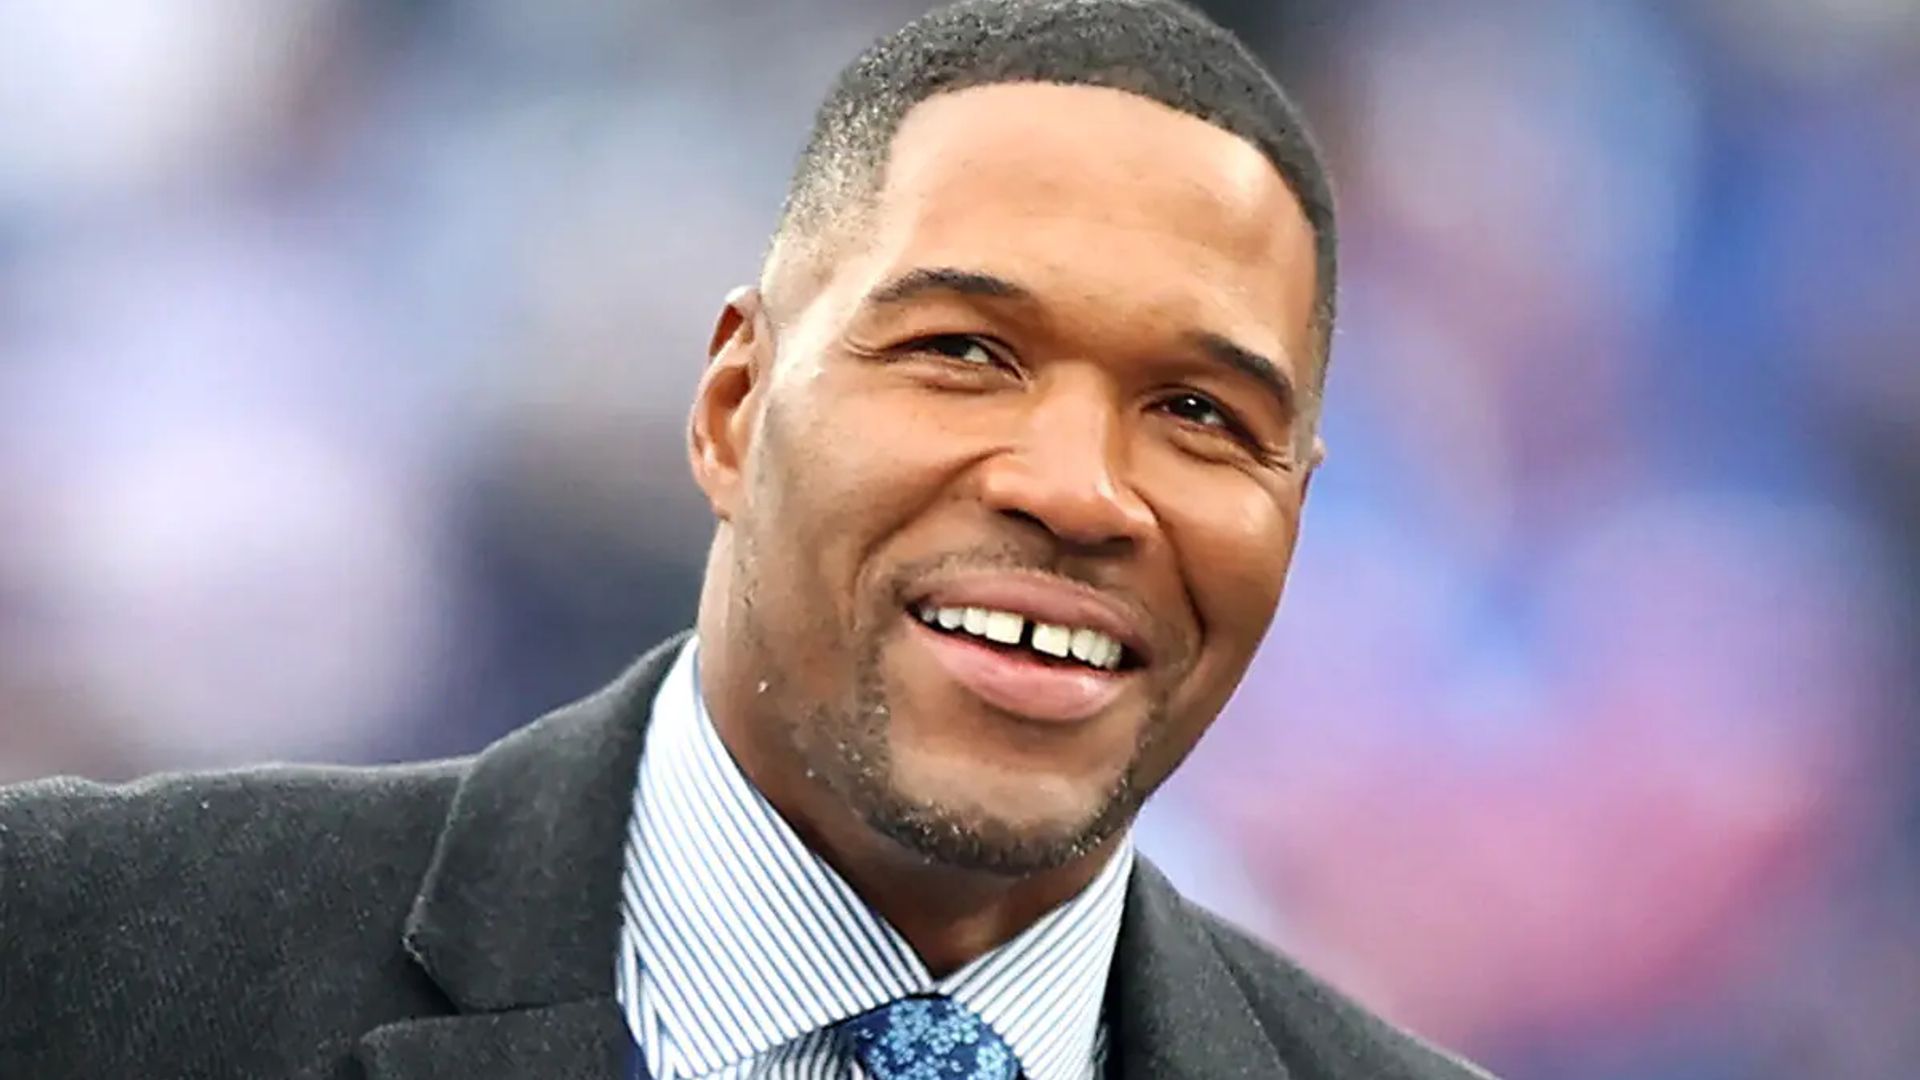 Michael Strahan smiles for the cameras